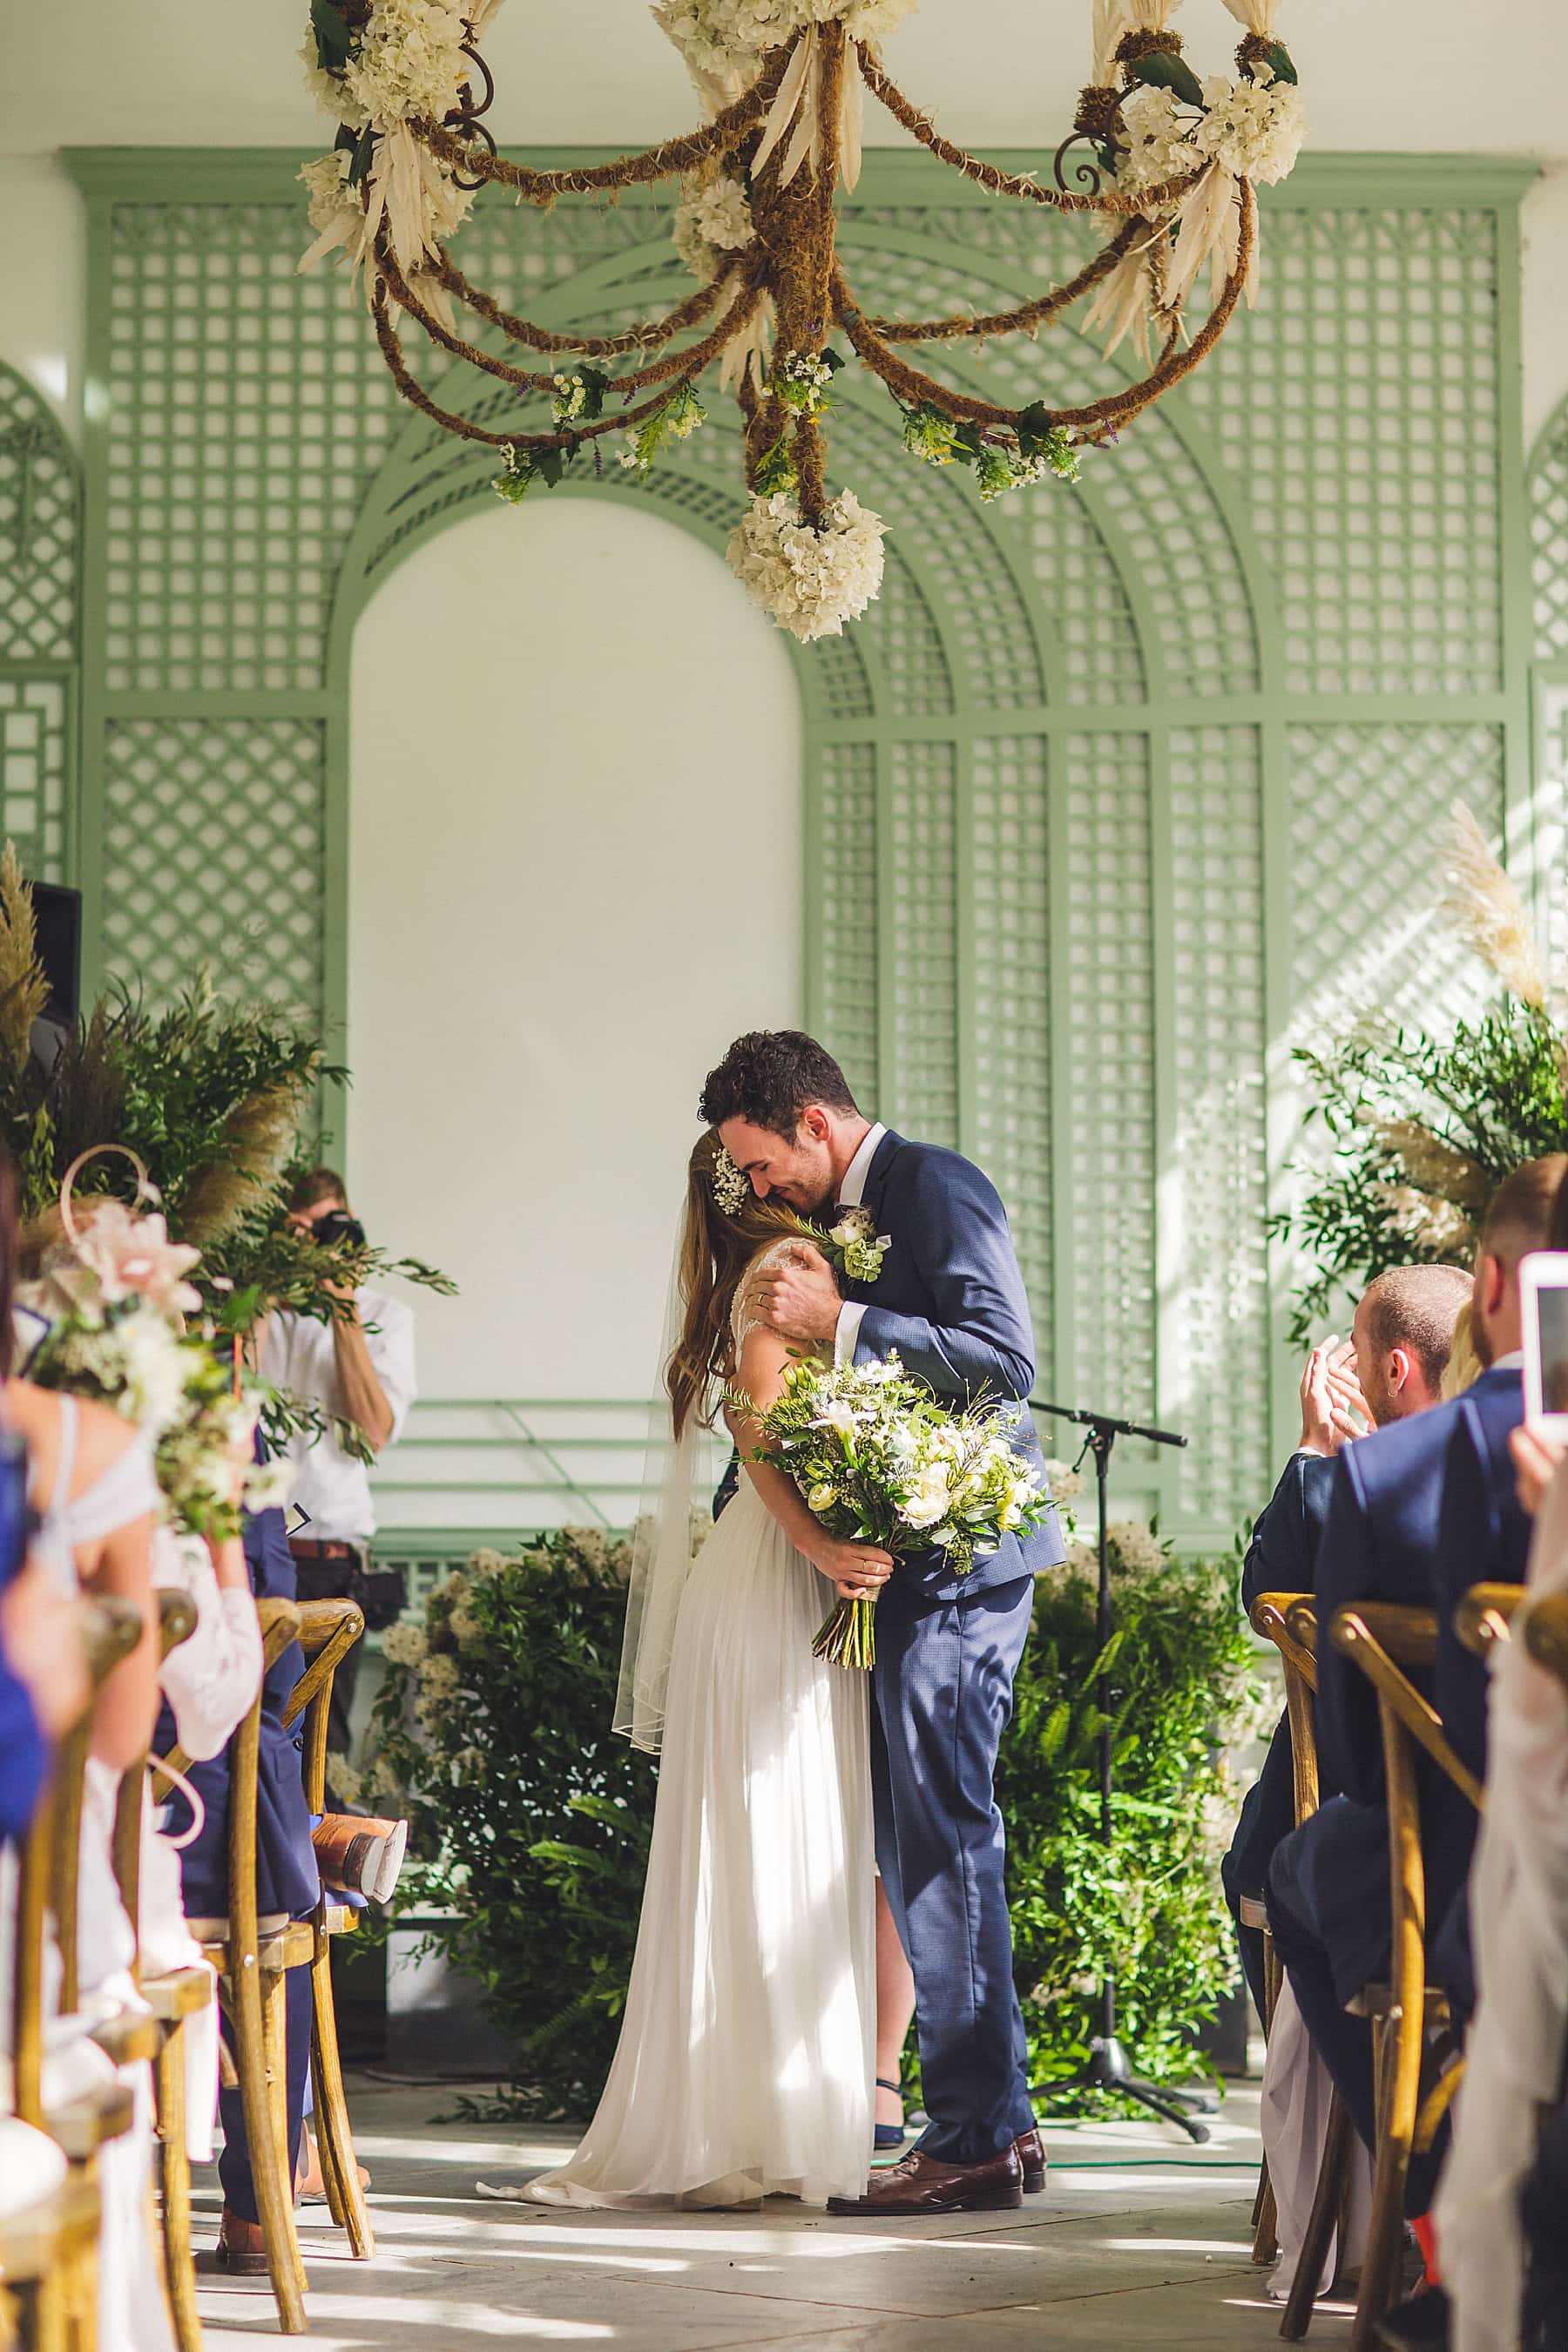 brighton wedding photographer,hugh and emily potter,st peters church brighton,pang dean old barn,confetti exit,